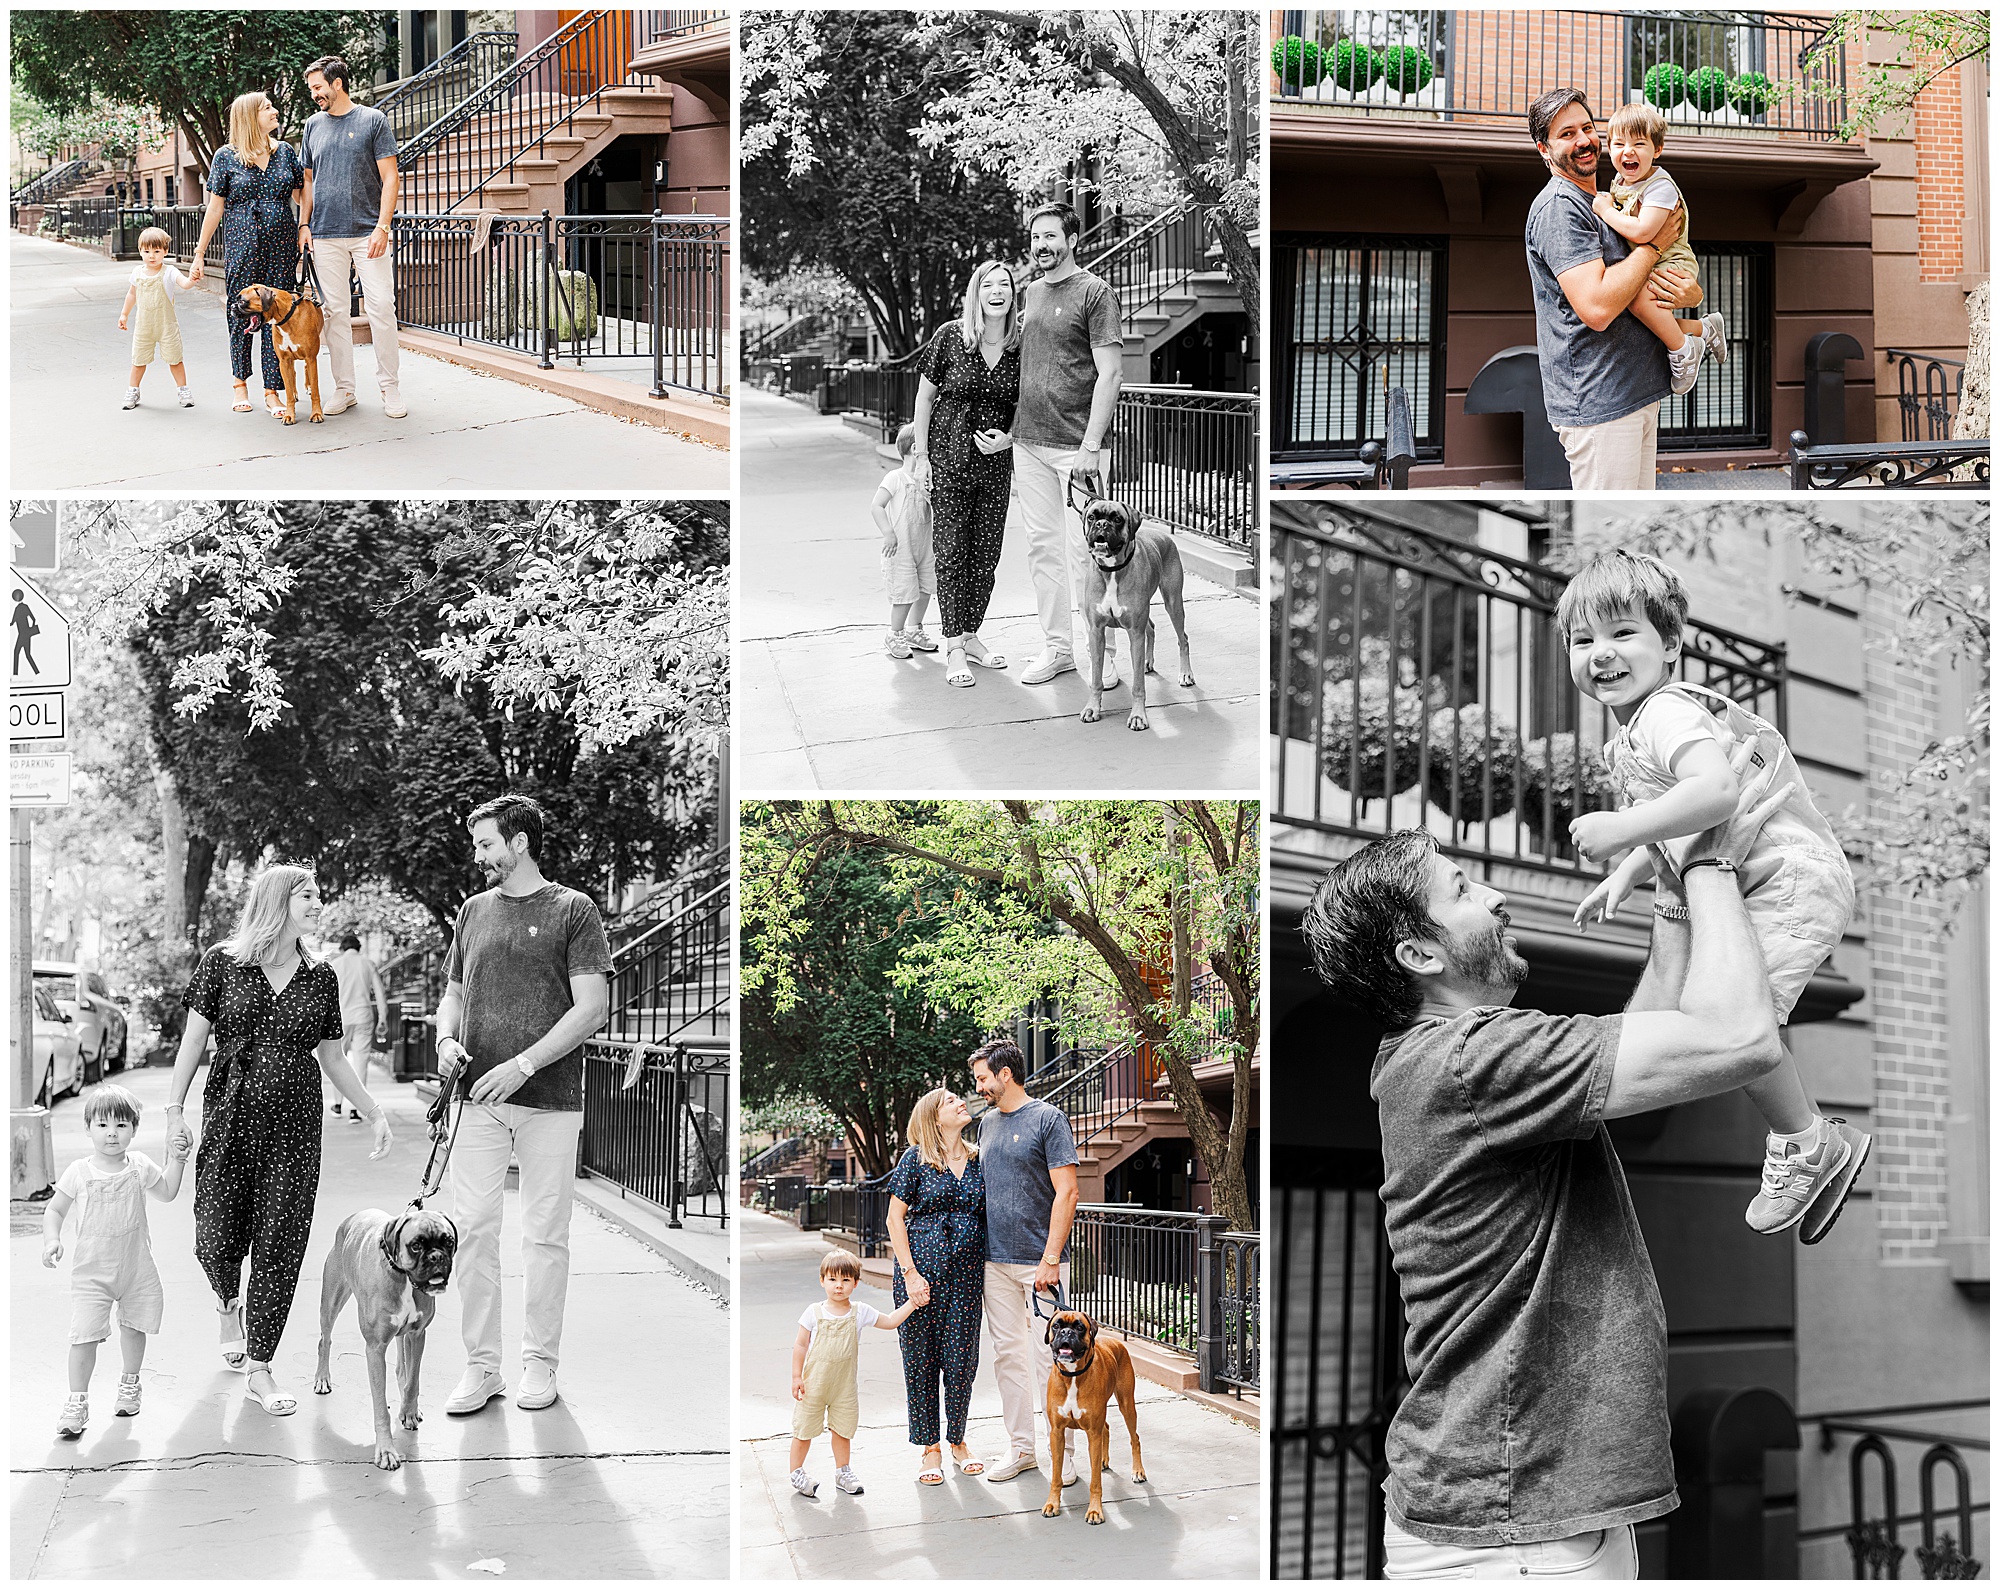 Playful family photo shoot in Brooklyn Heights